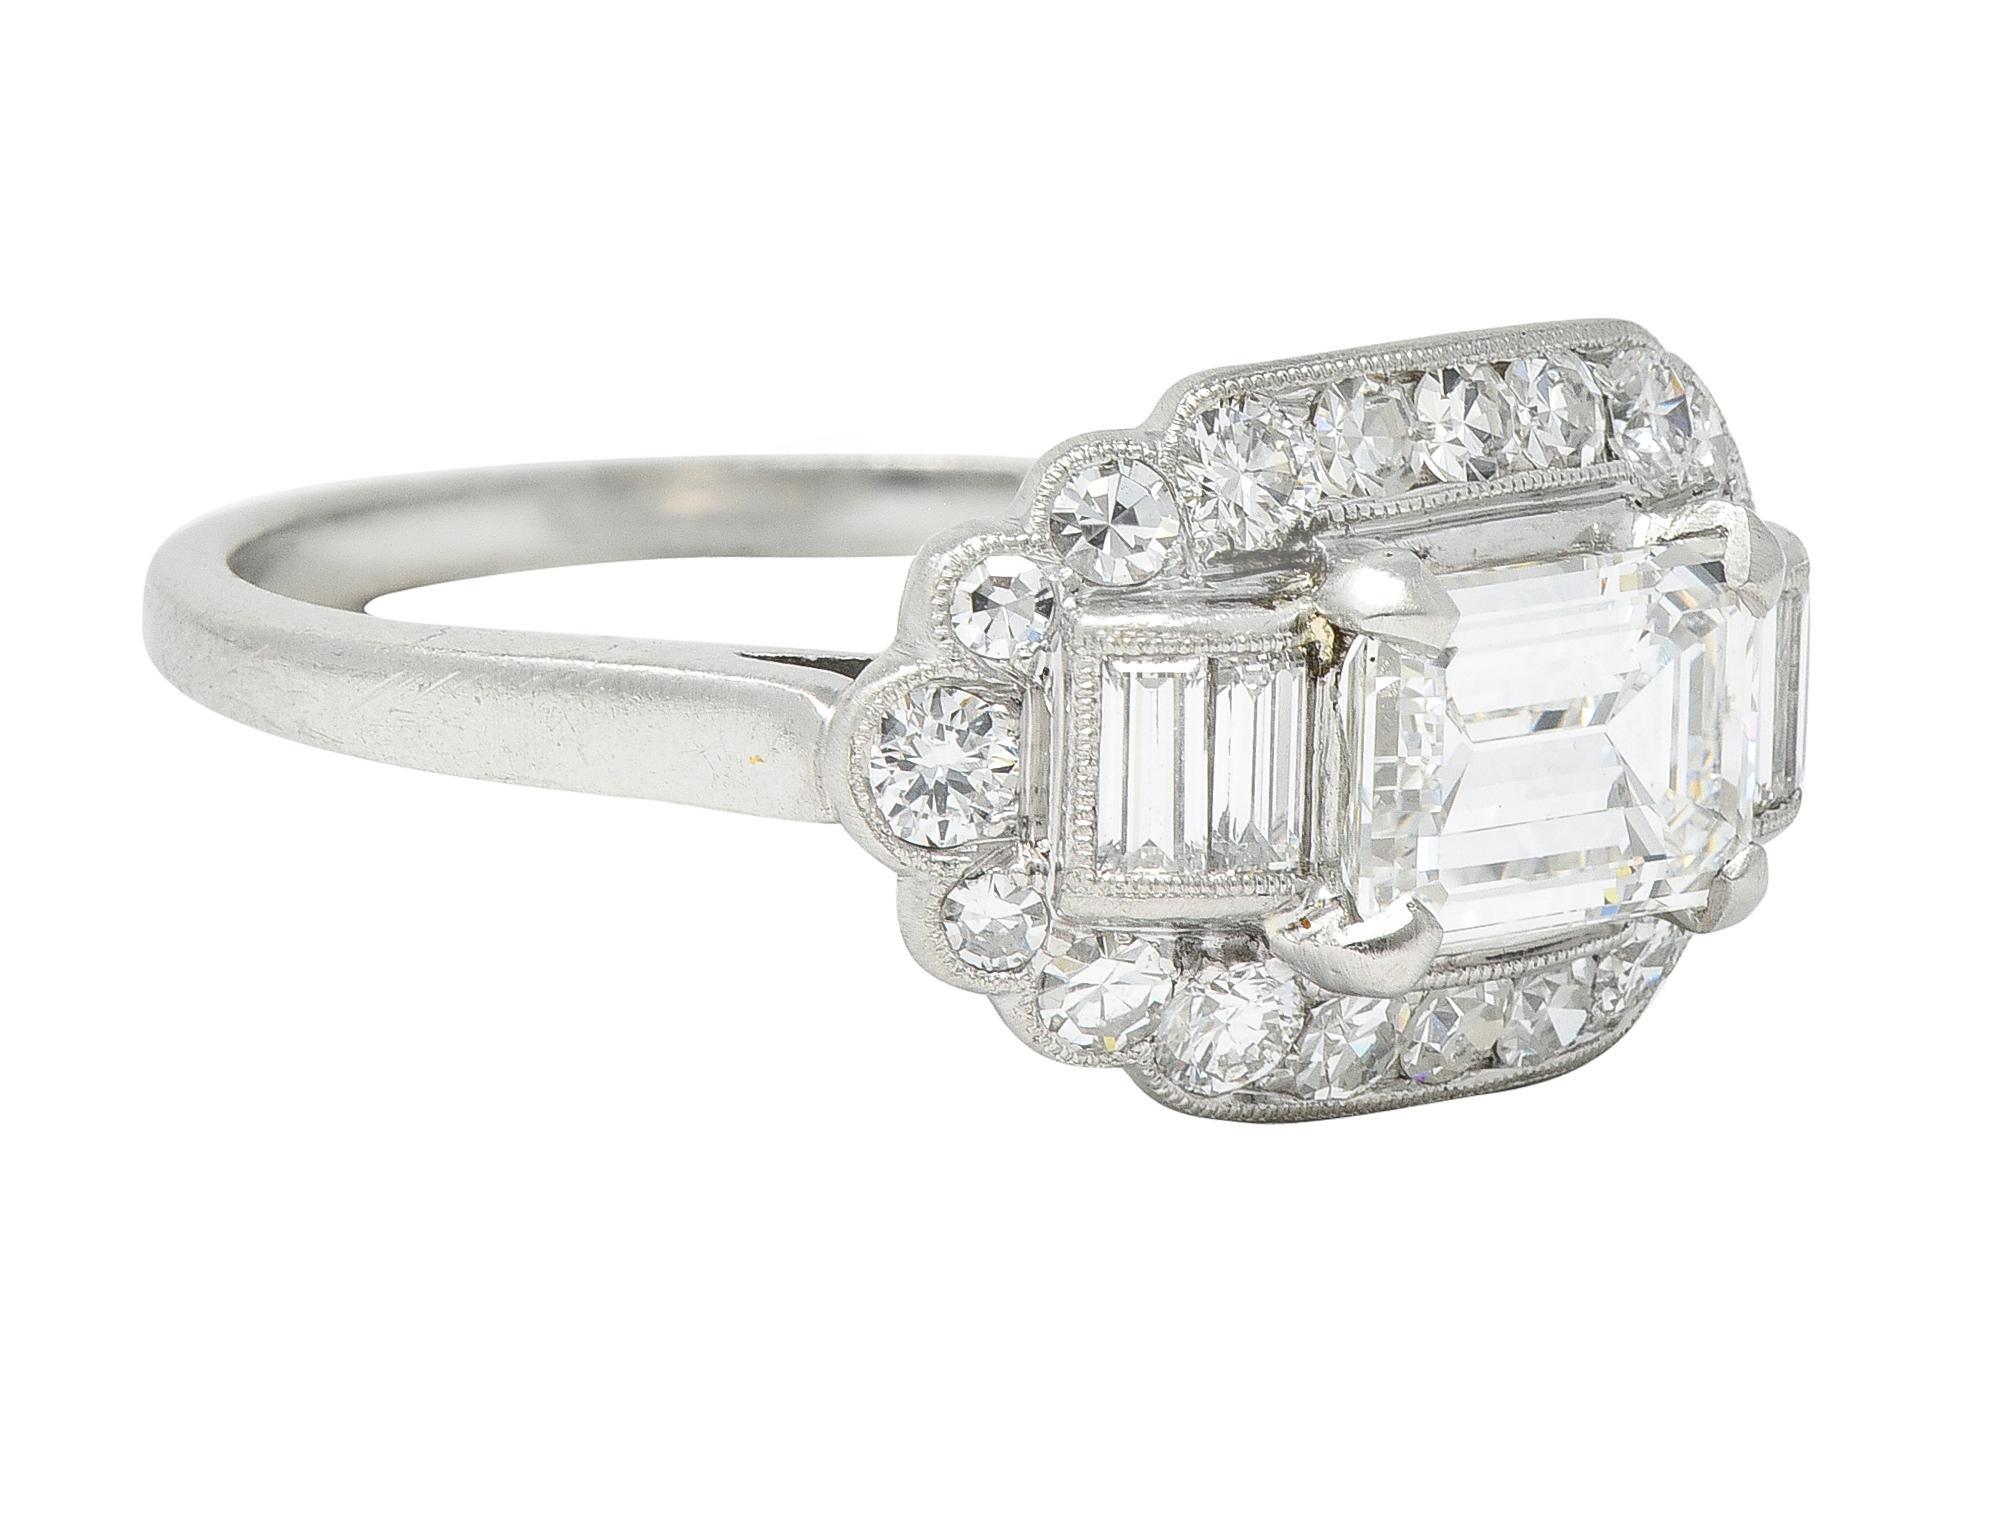 Centering an emerald cut diamond weighing 1.03 carats - G color with VS1 clarity
Prong set east to west and flanked by baguette cut diamonds 
Weighing approximately 0.24 carat total G color with VS1 clarity
Bar set with a recessed oval shaped halo